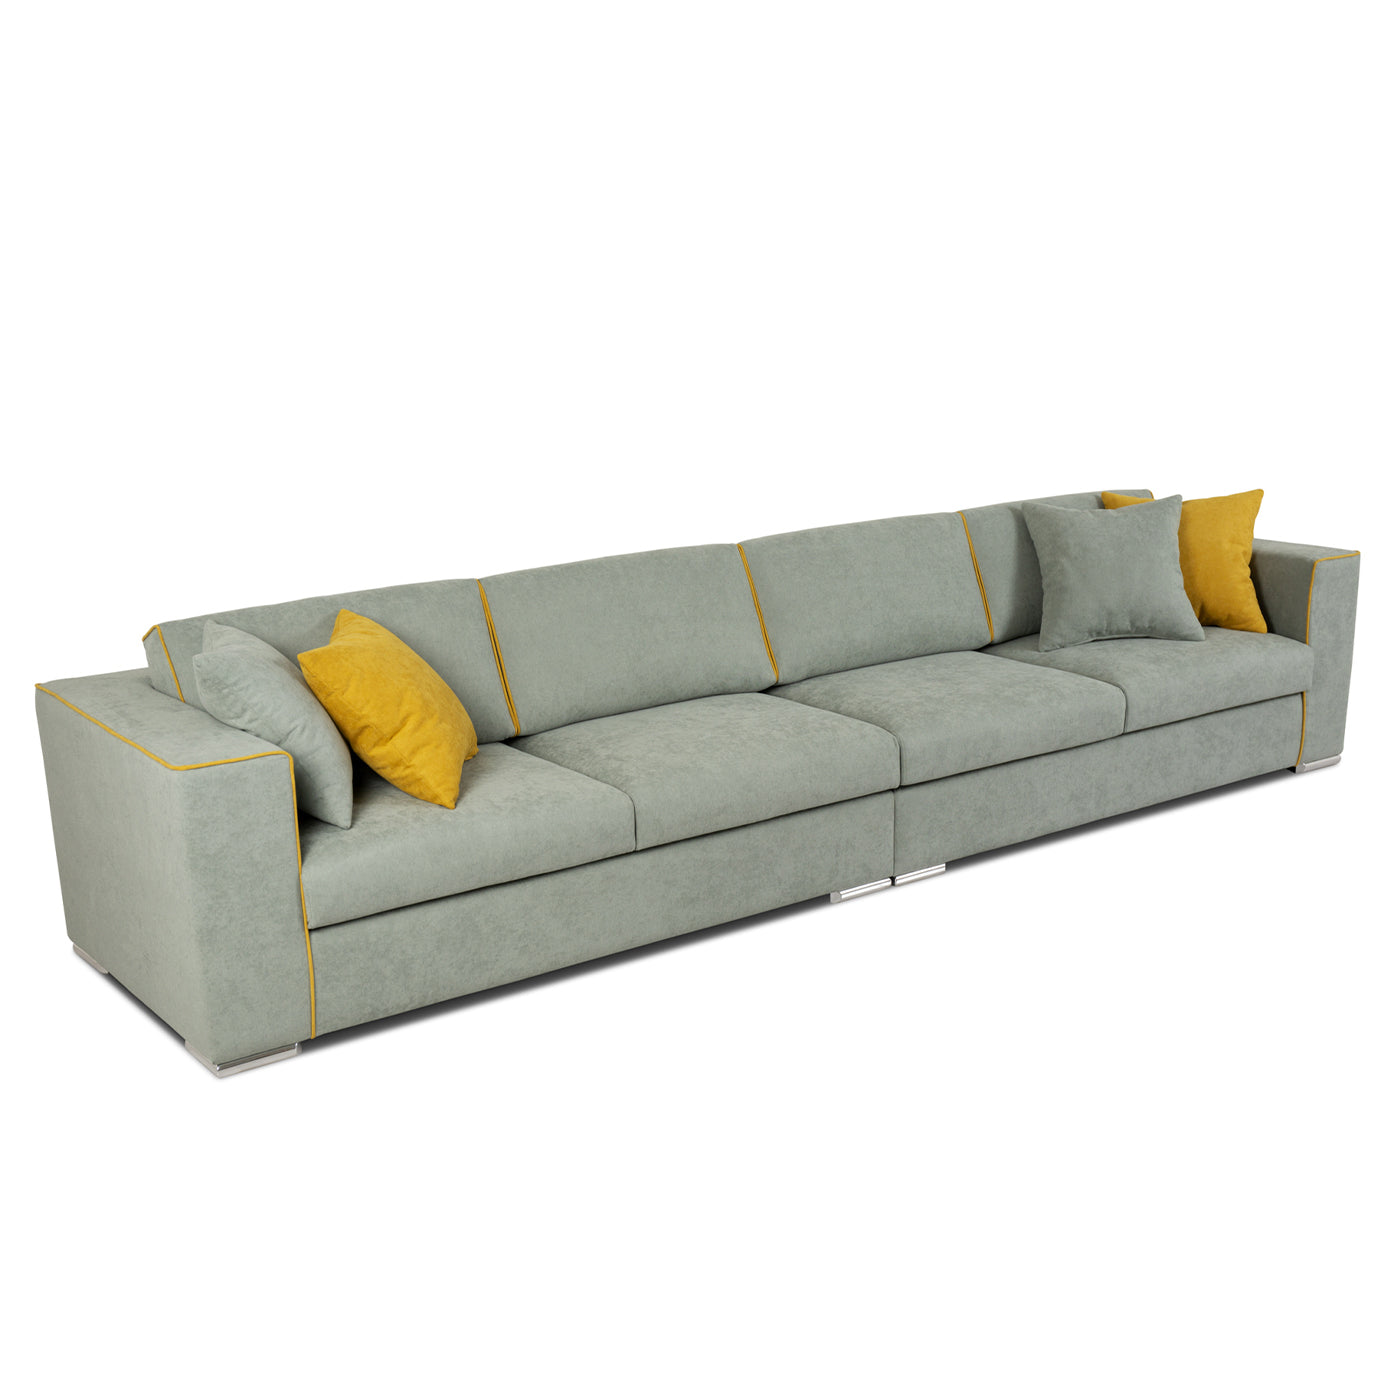 Jackie 6-Seater Gray and Yellow Sofa - Alternative view 2